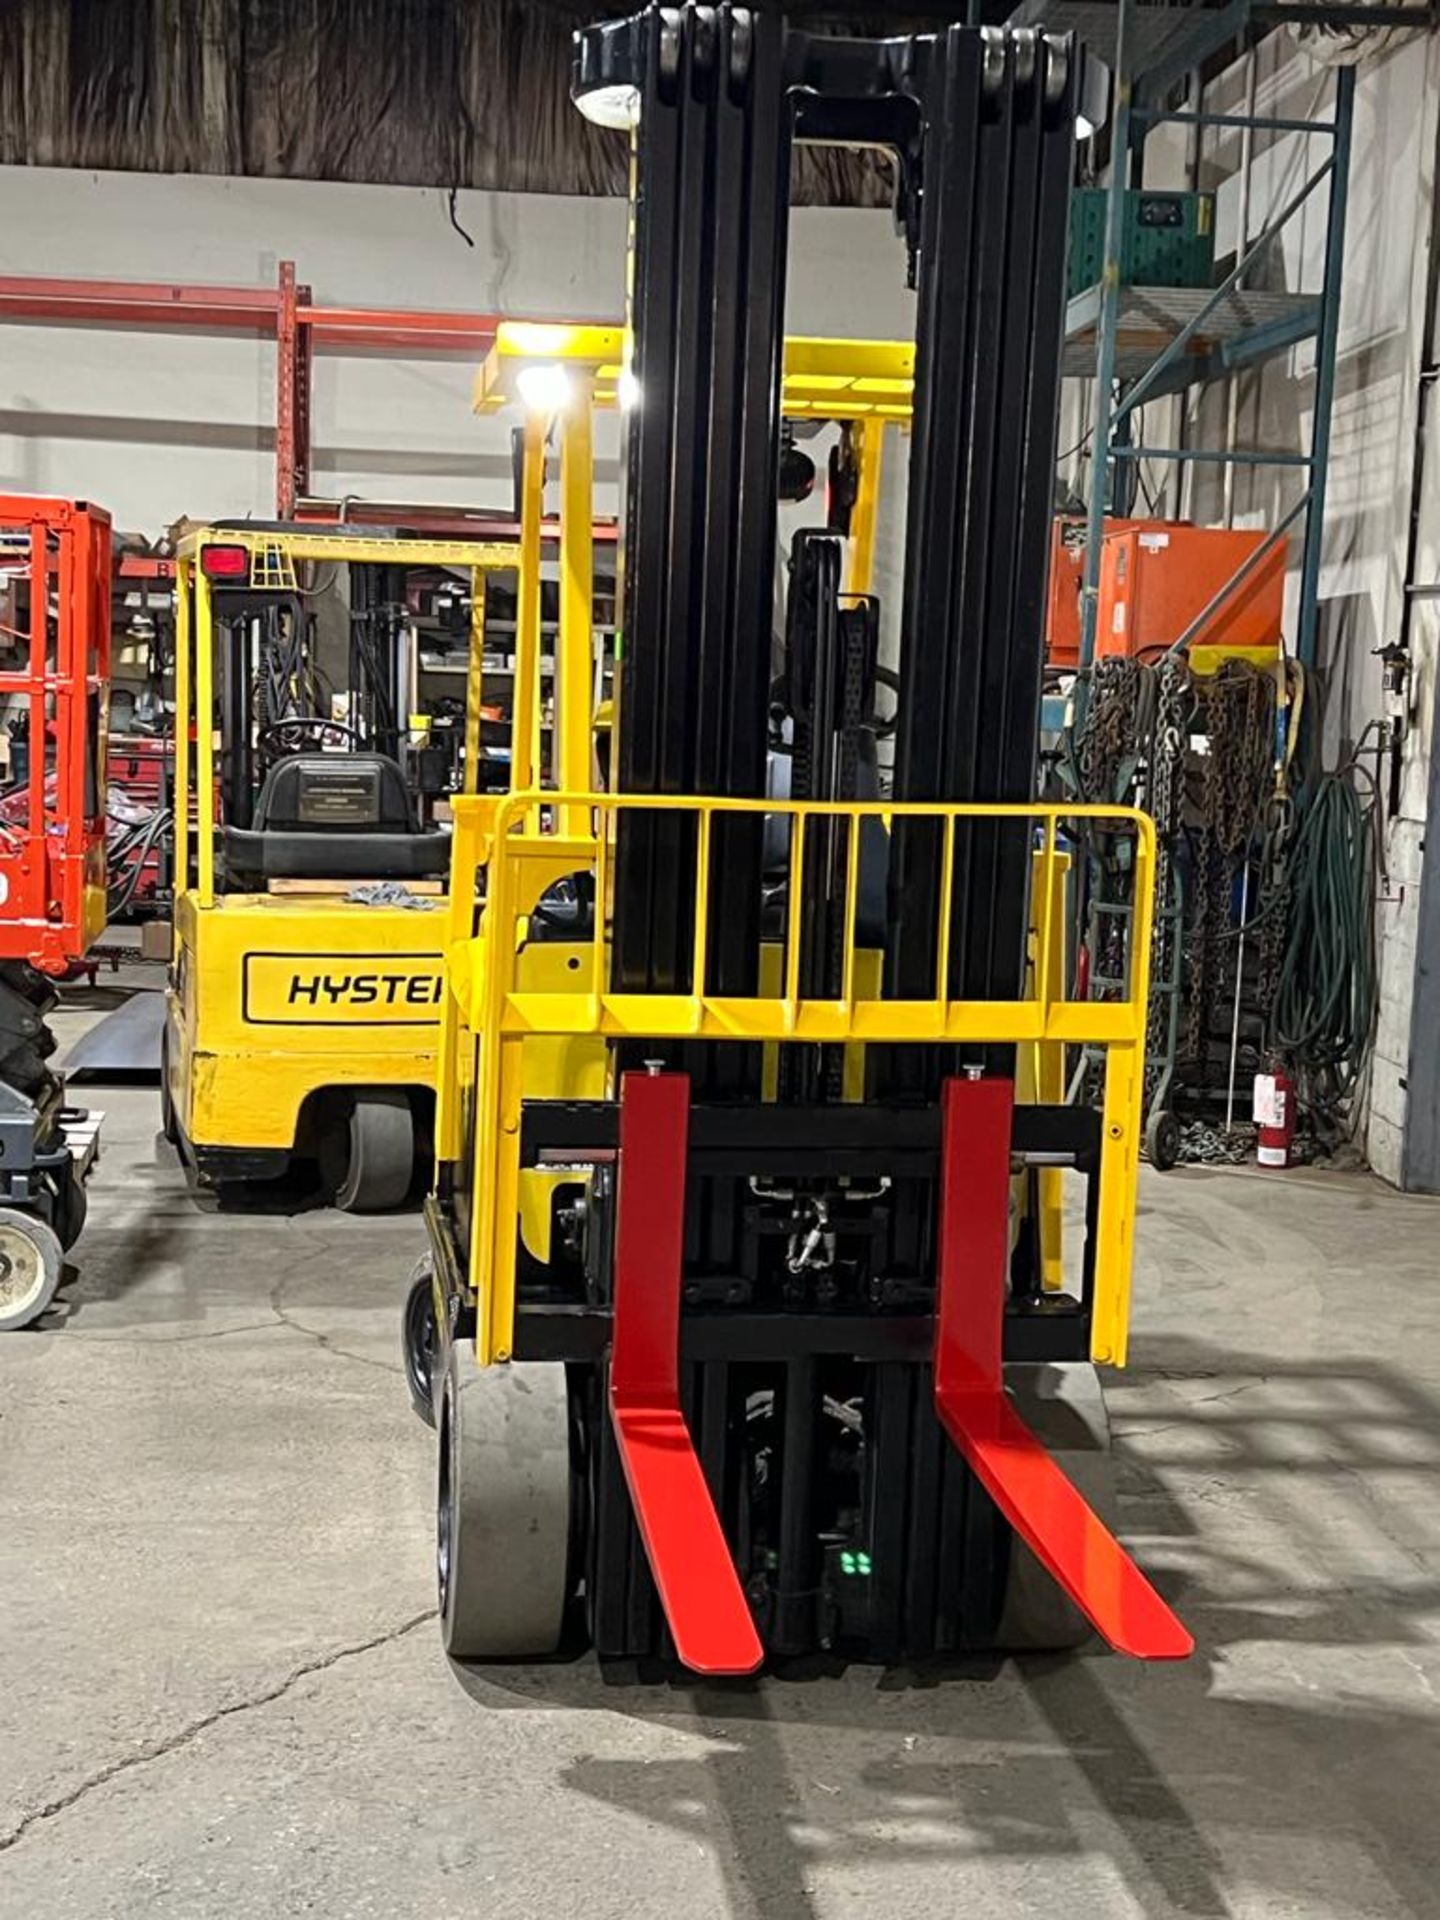 2018 Hyster 5,000lbs Capacity Forklift Electric with 48V Battery & 4-STAGE MAST with Sideshift - Bild 3 aus 4